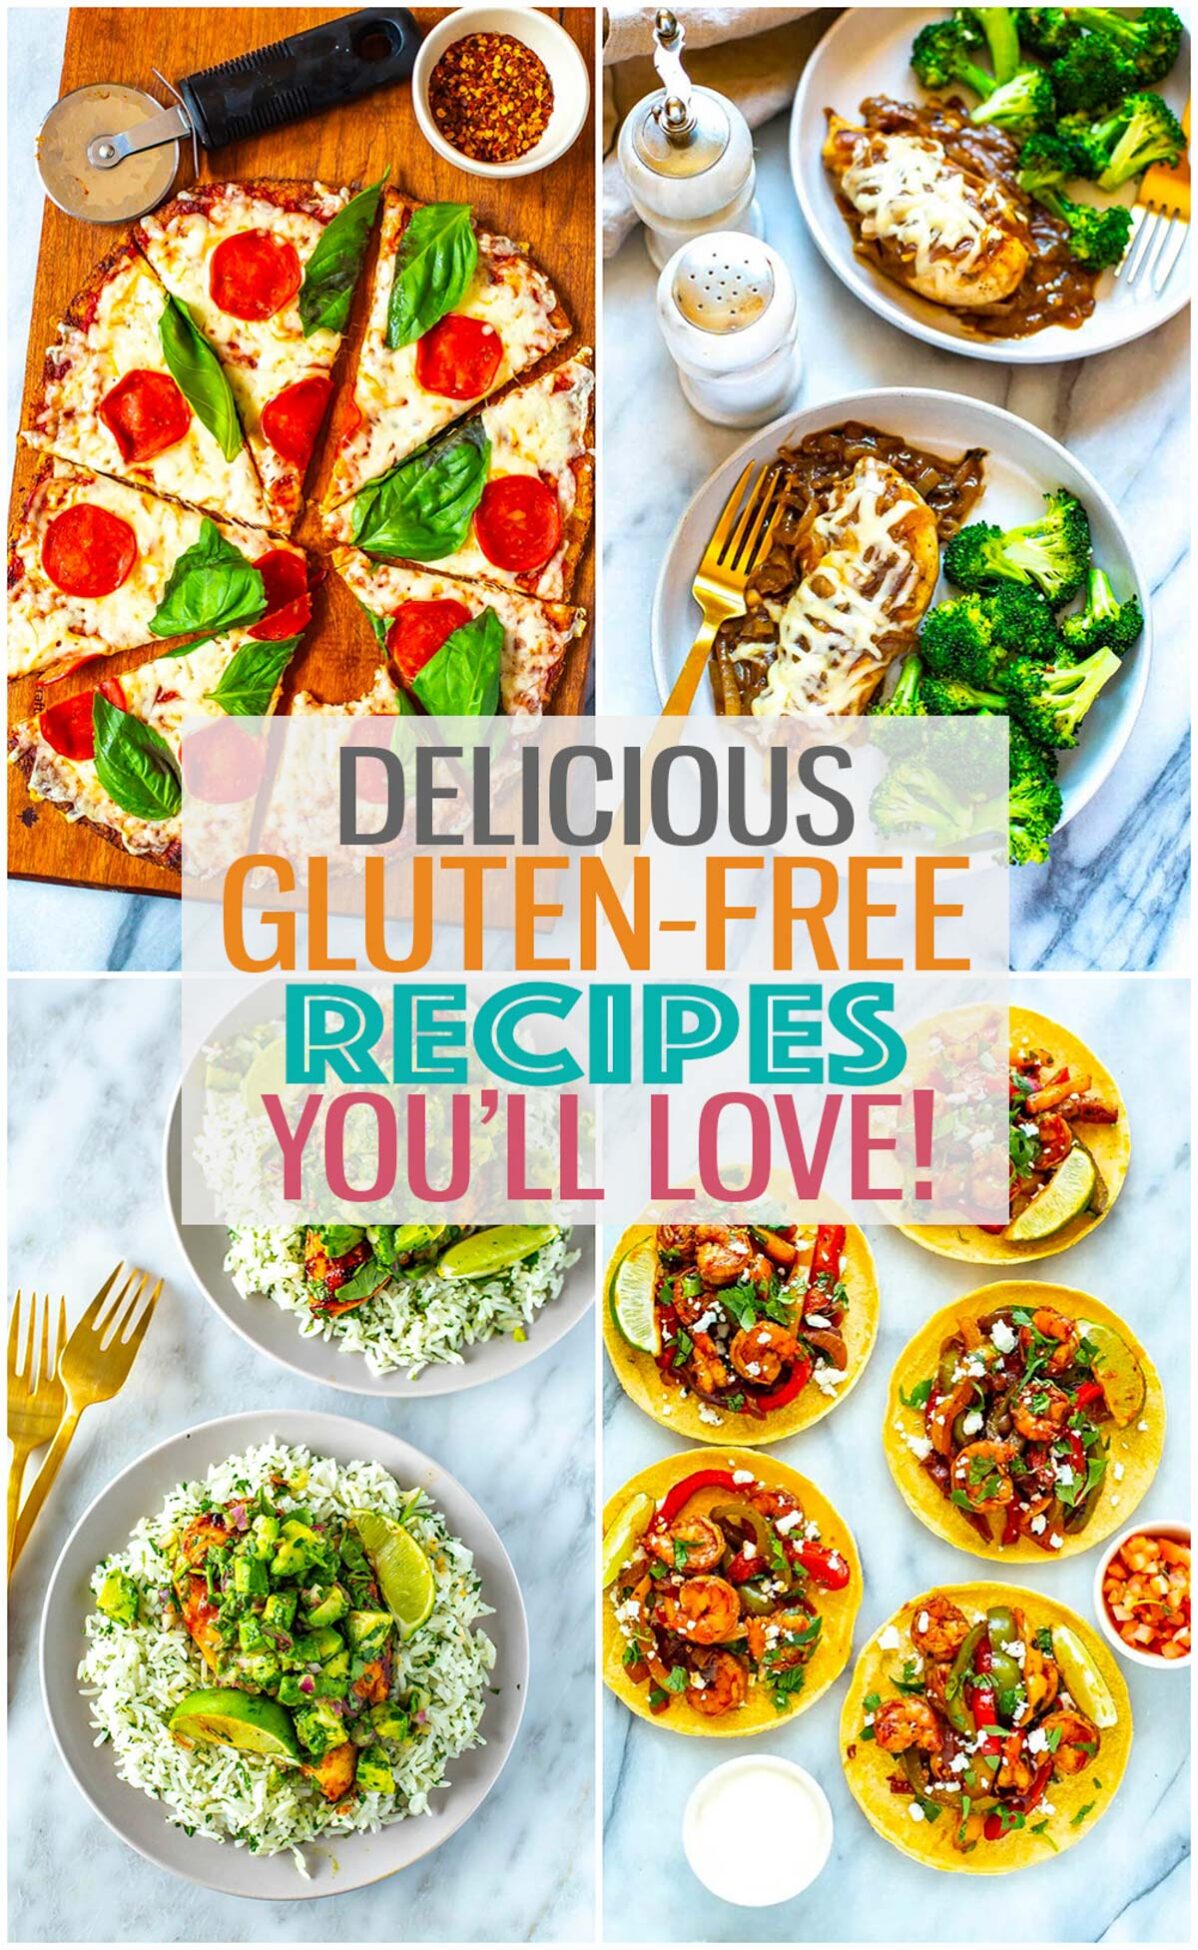 A collage of four different gluten-free recipes with the text "Delicious Gluten-Free Recipes You'll Love!" layered over top.